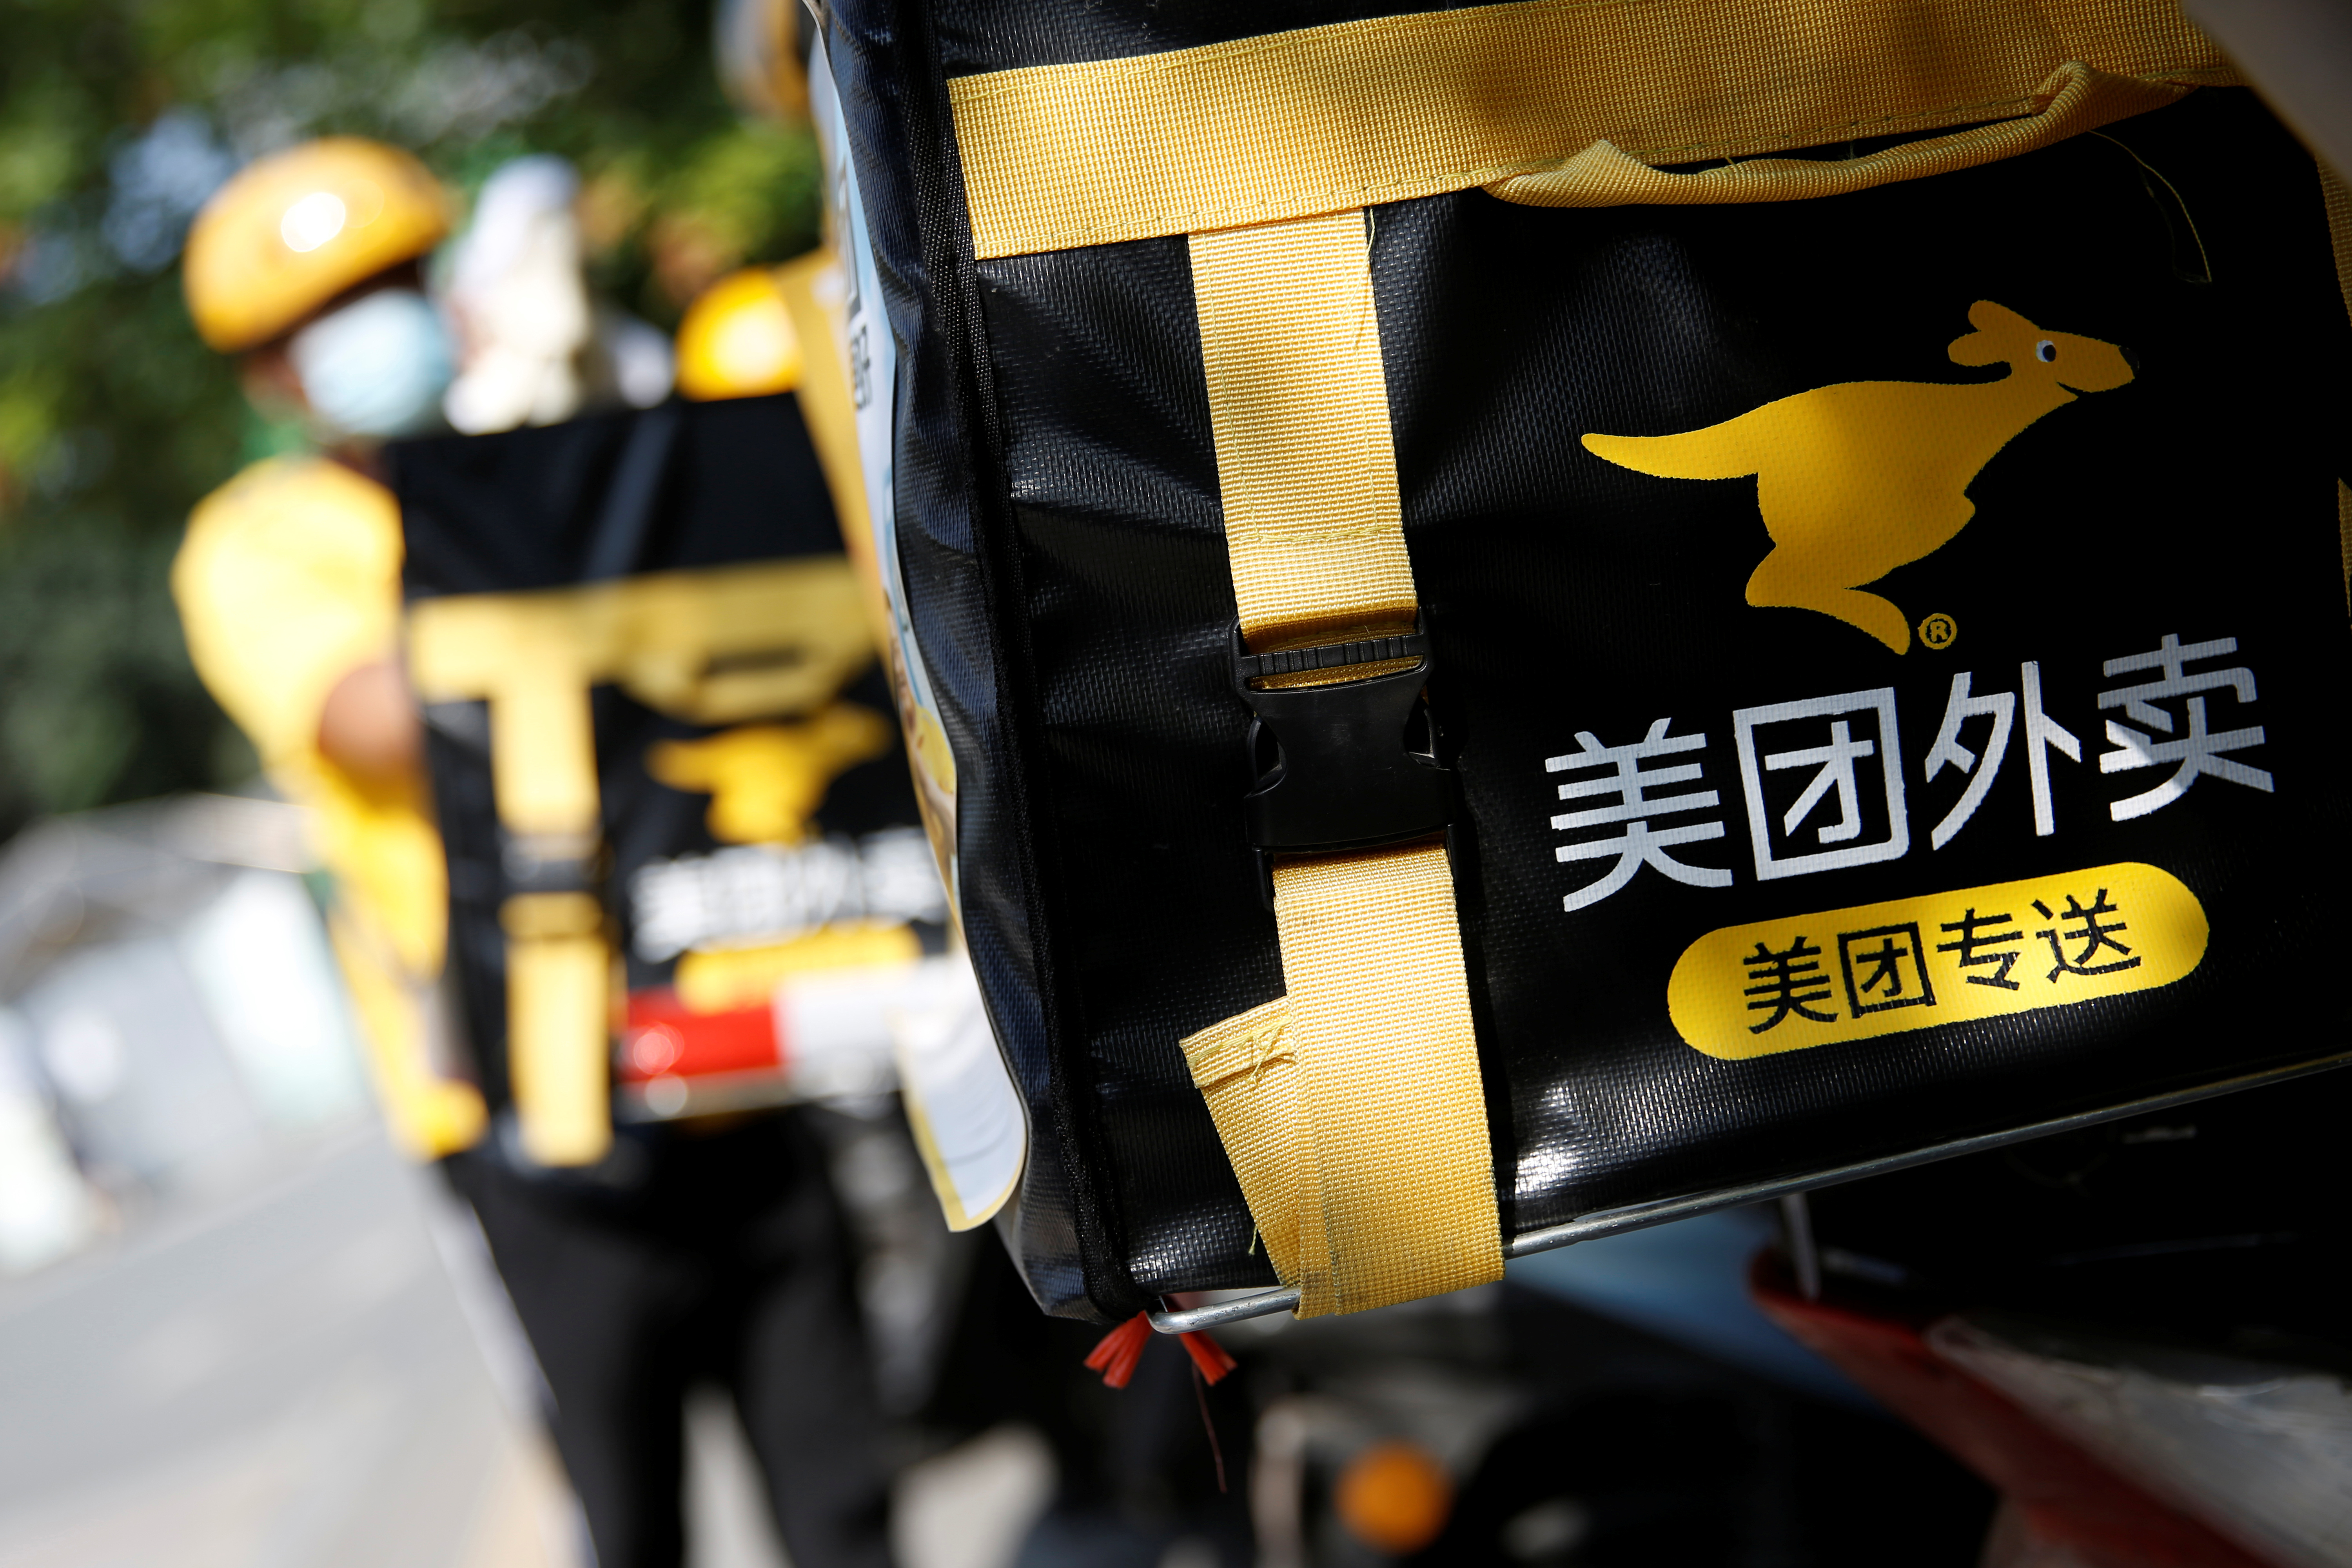 Meituan delivery worker in Beijing amid COVID-19